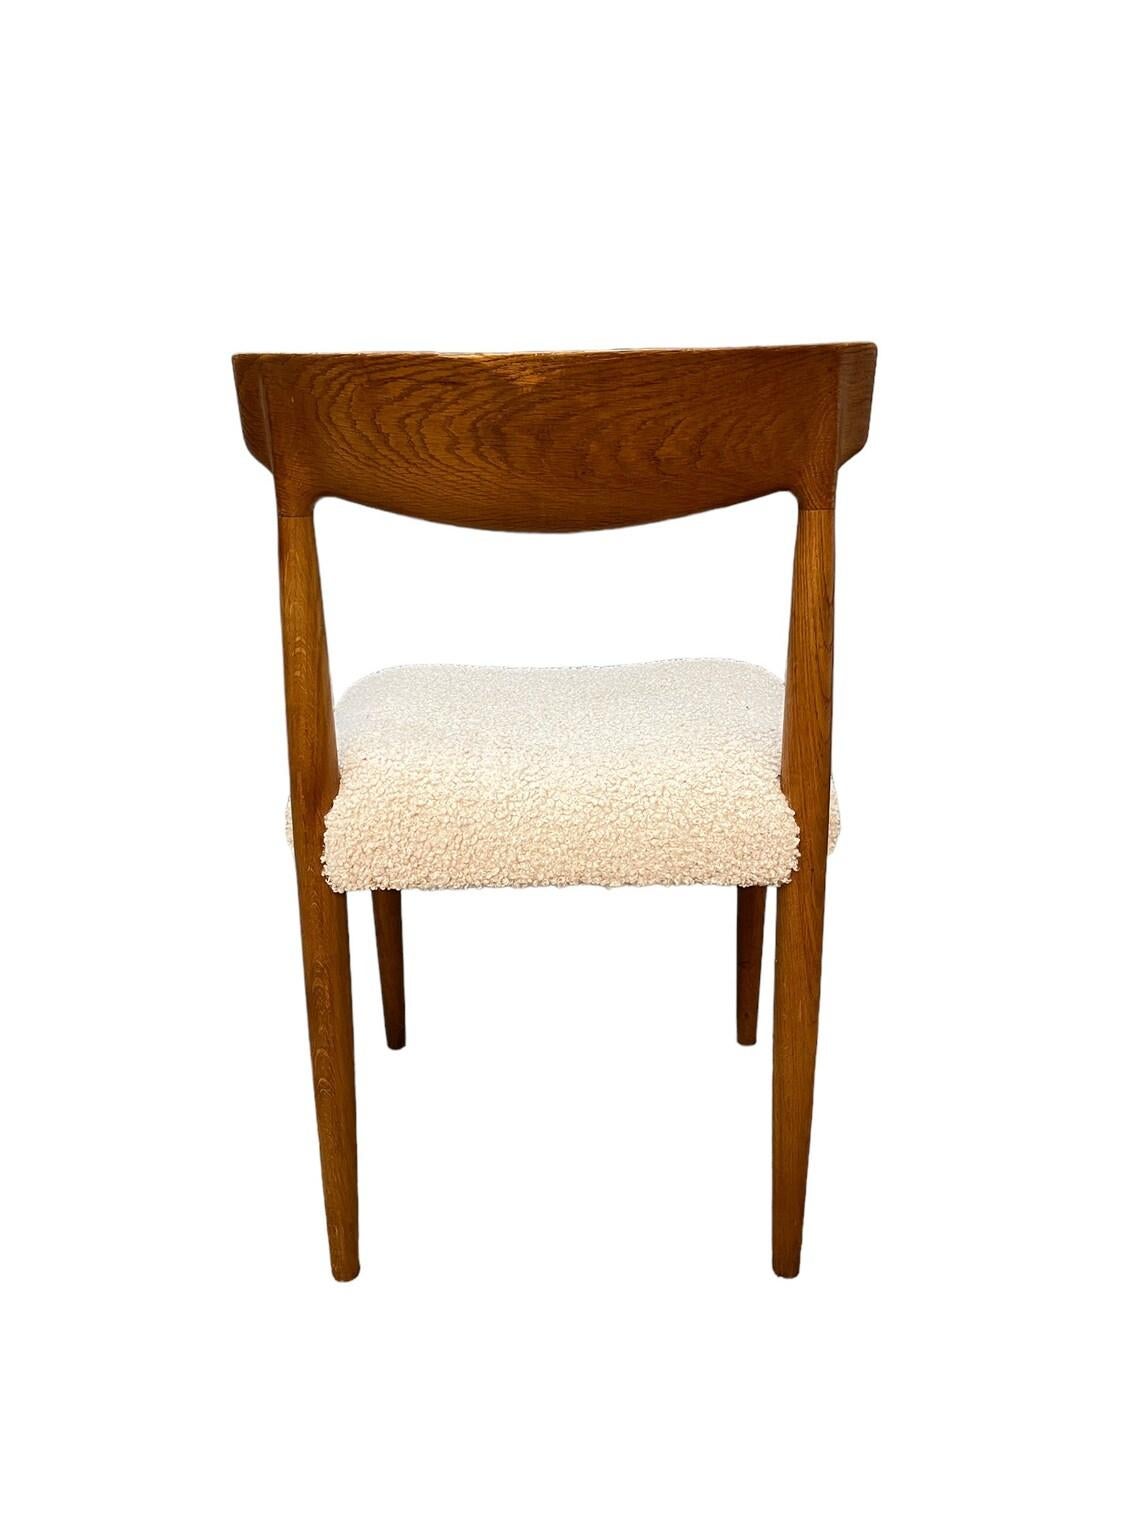 Mid Century danish teak dining chairs set of 4 In Good Condition For Sale In Hudson, NY